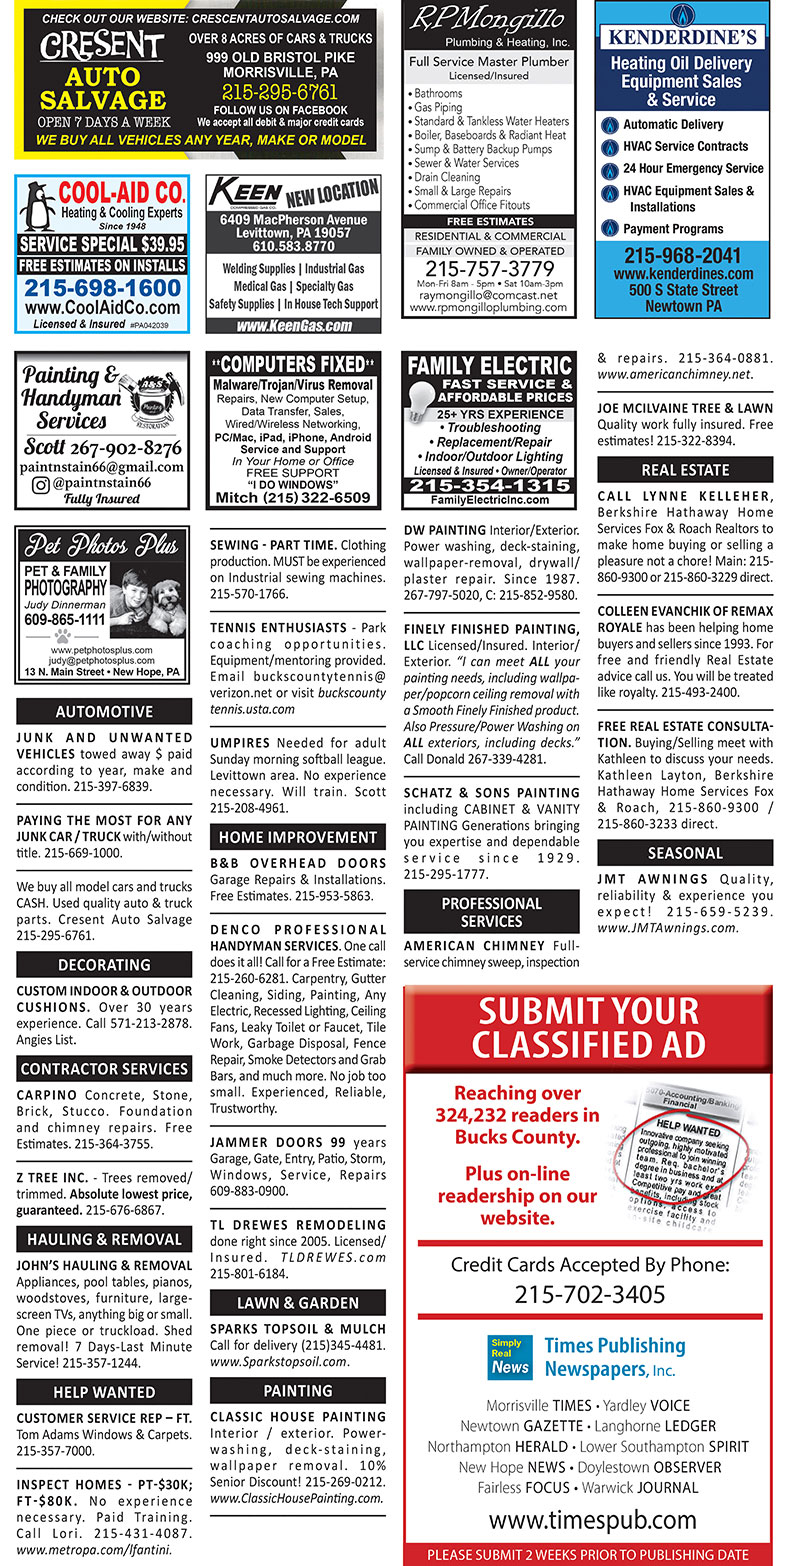 Classified For Web 2 O Times Publishing Newspapers Inc